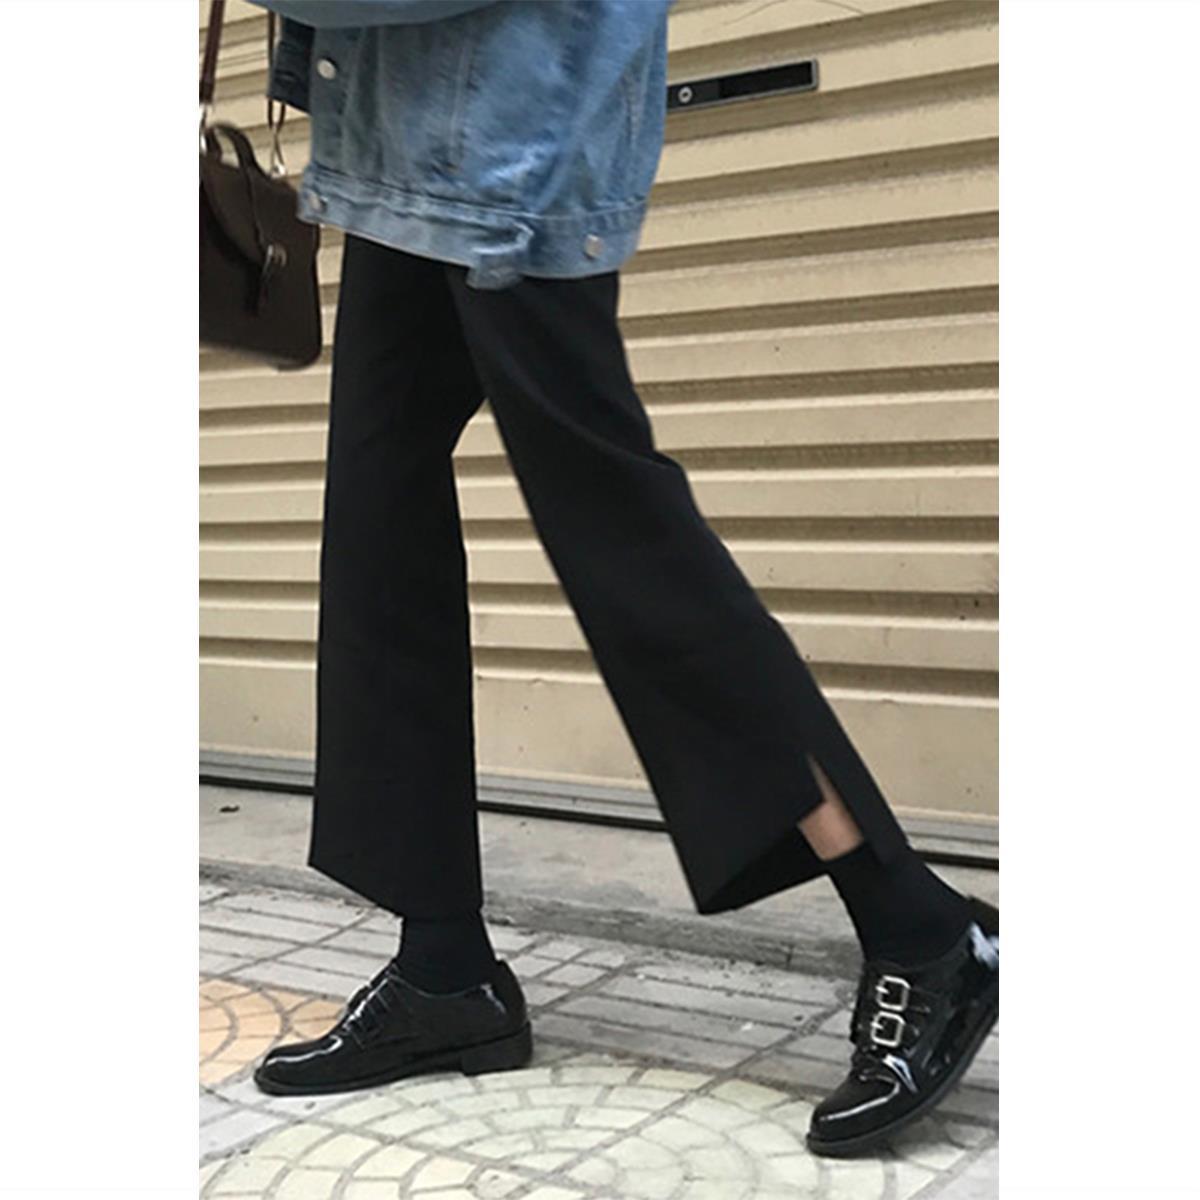 Irregular cropped trousers spring and autumn 2020 new versatile loose high waist slim casual straight pants student girl